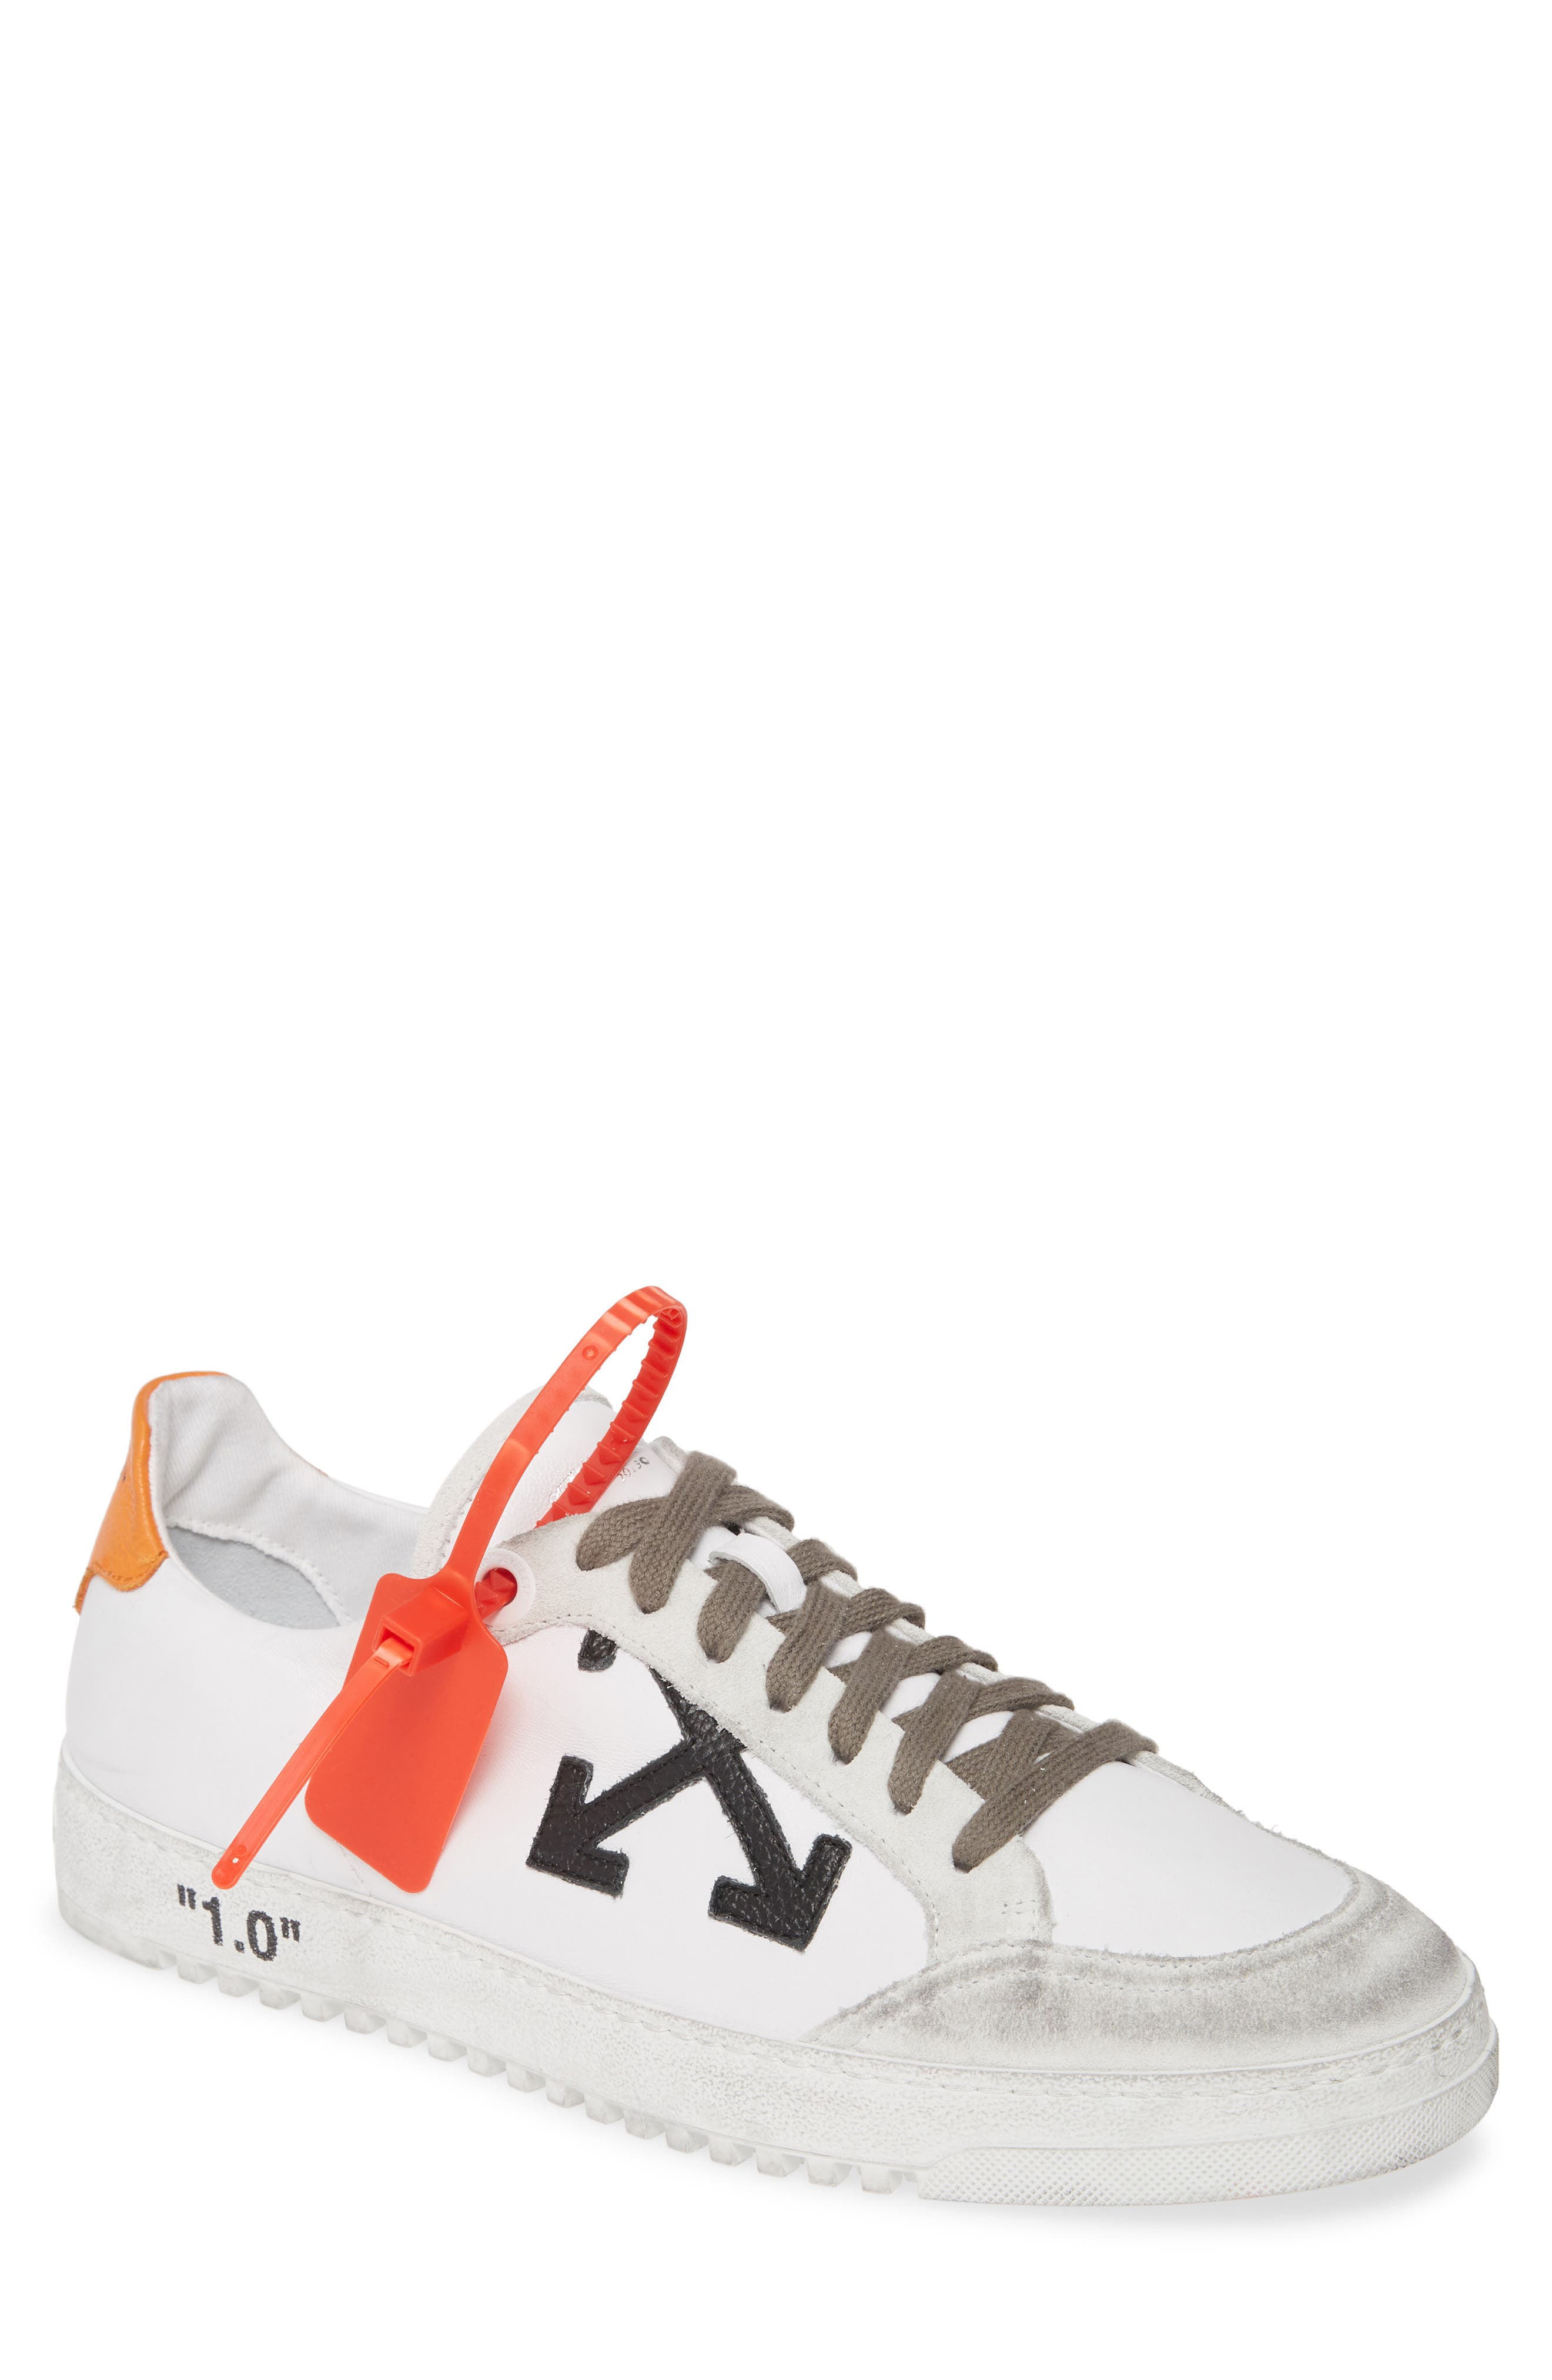 off white color sneakers